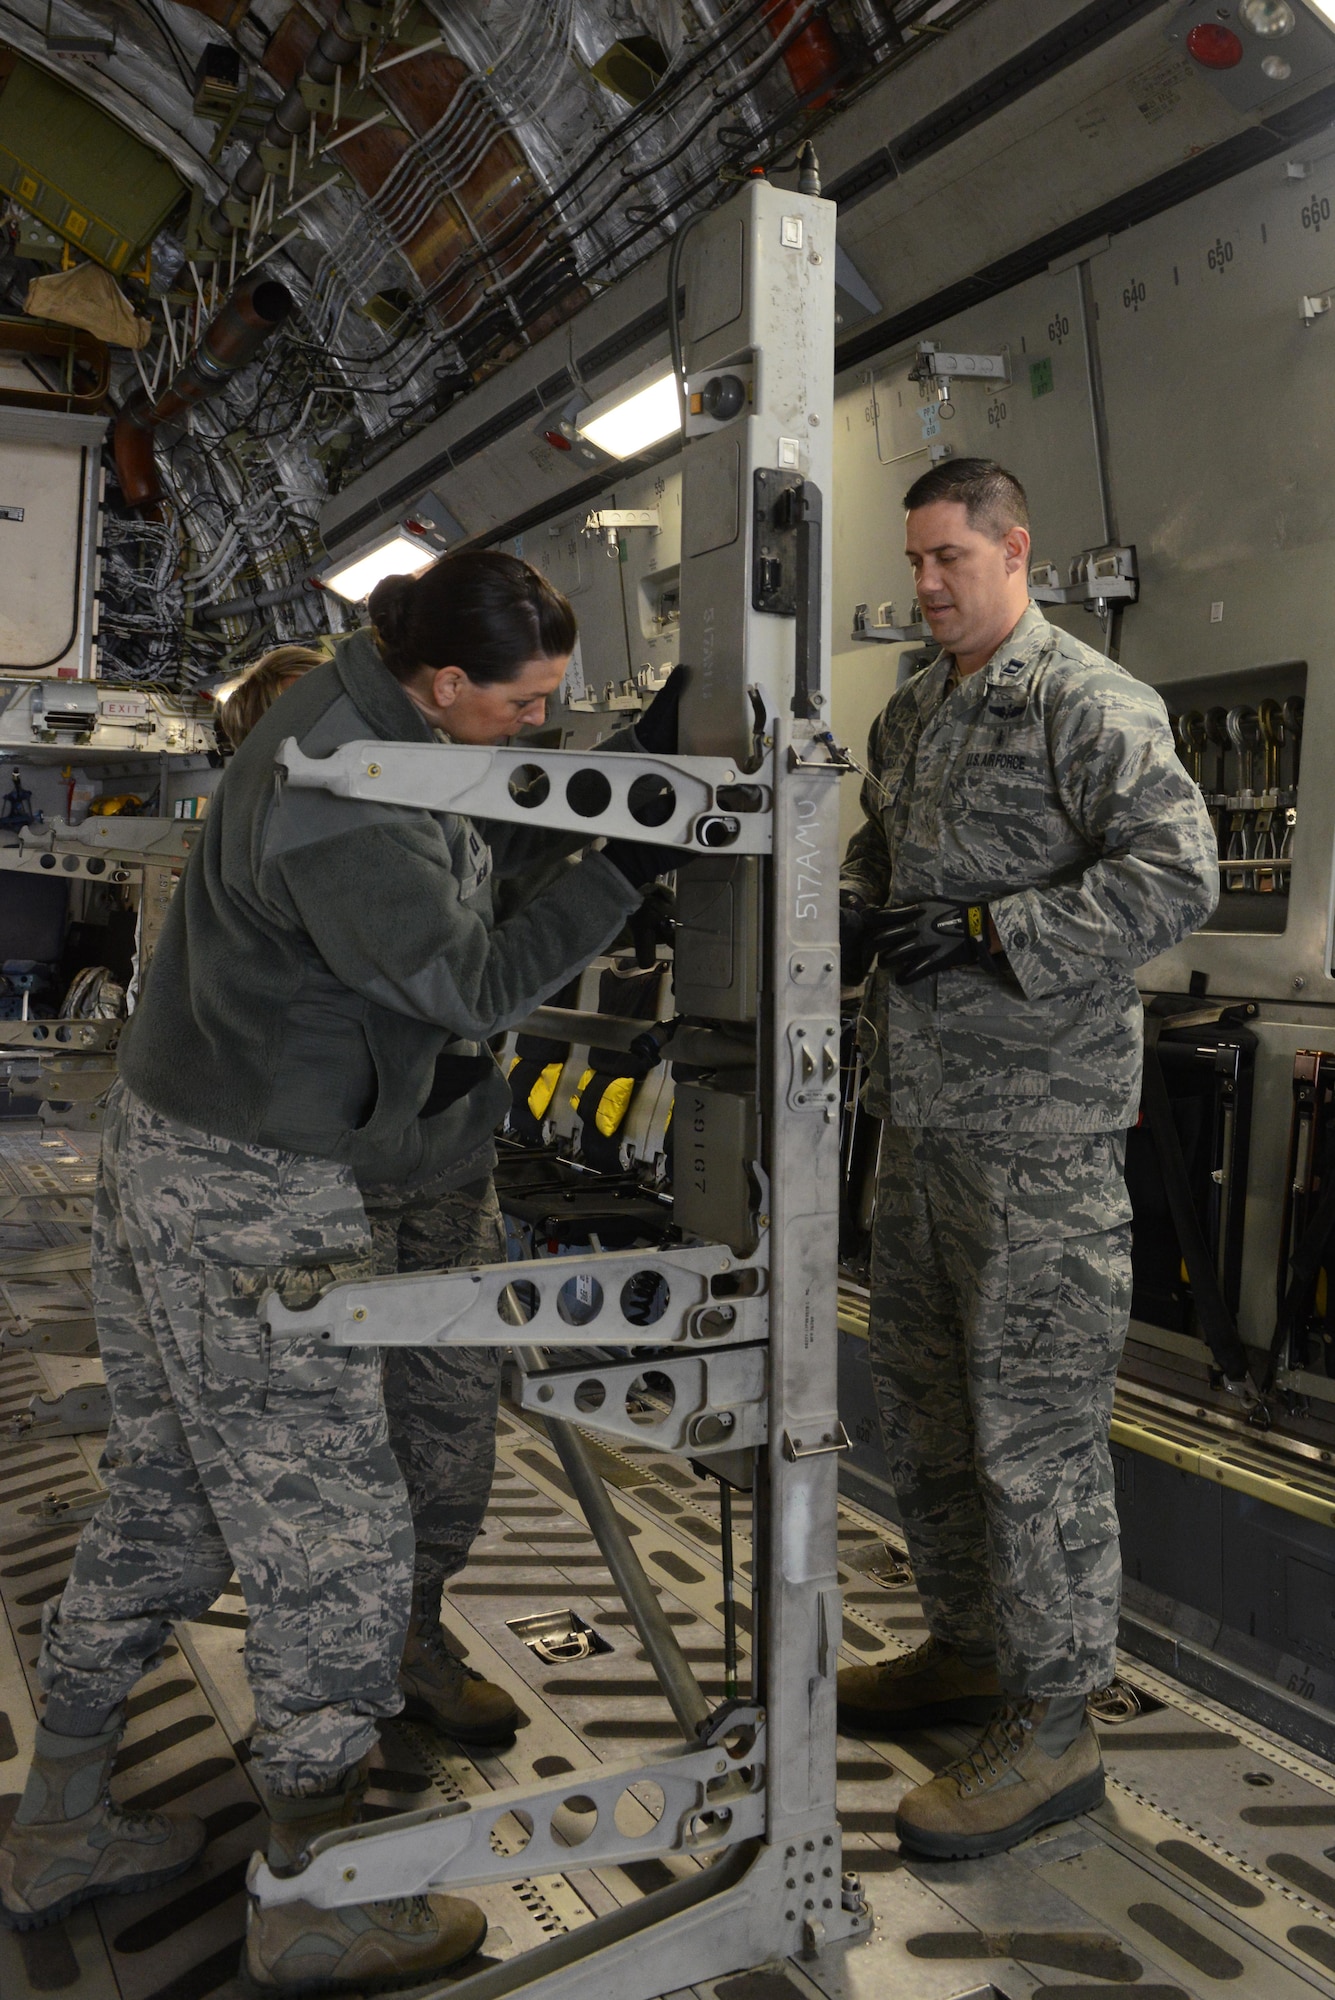 U.S. Air Force captains Paul Padilla (right) and Leslie Mead, 673d Medical Group, build inflight-patient stands inside a C-17 Globemaster III for an EnRoute Patient Staging System exercise at Joint Base Elmendorf-Richardson, Alaska, April 3, 2017. The ERPSS provides patient reception and limited emergent intervention, and ensures patients are medically and administratively prepared for flight in a safe and timely aeromedical evacuation. 